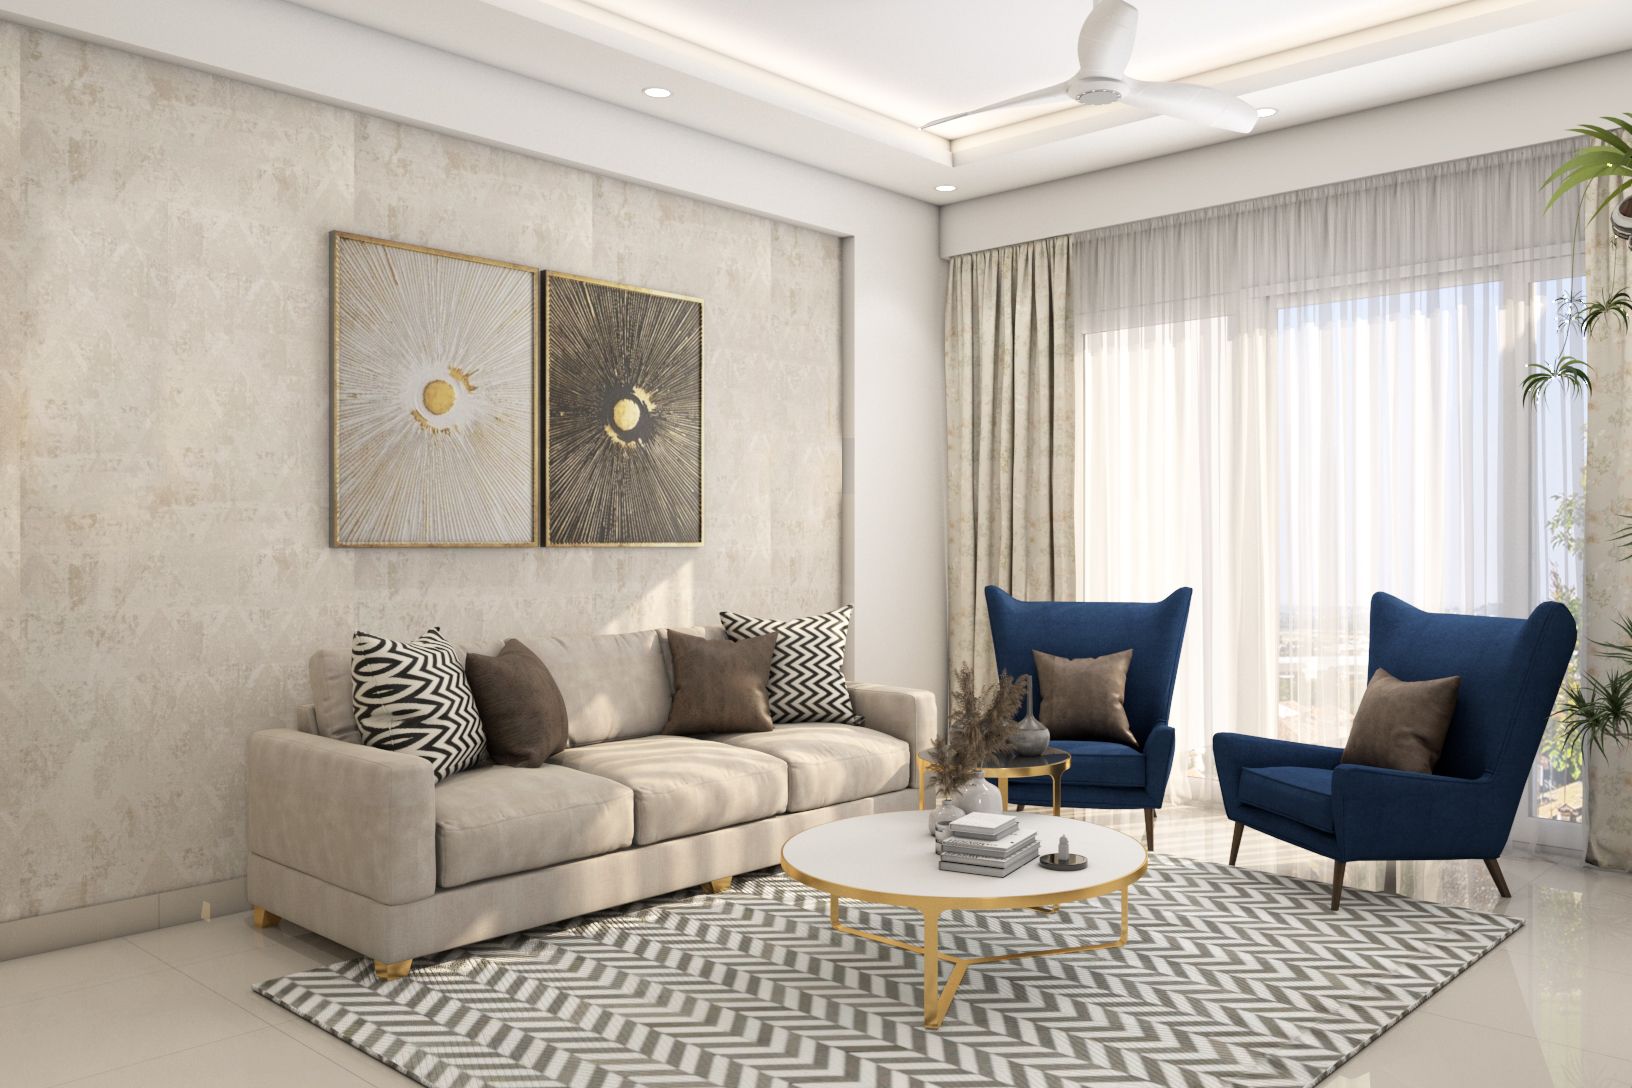 Modern Living Room Design With Beige Coloured Sofa And Blue Armchairs